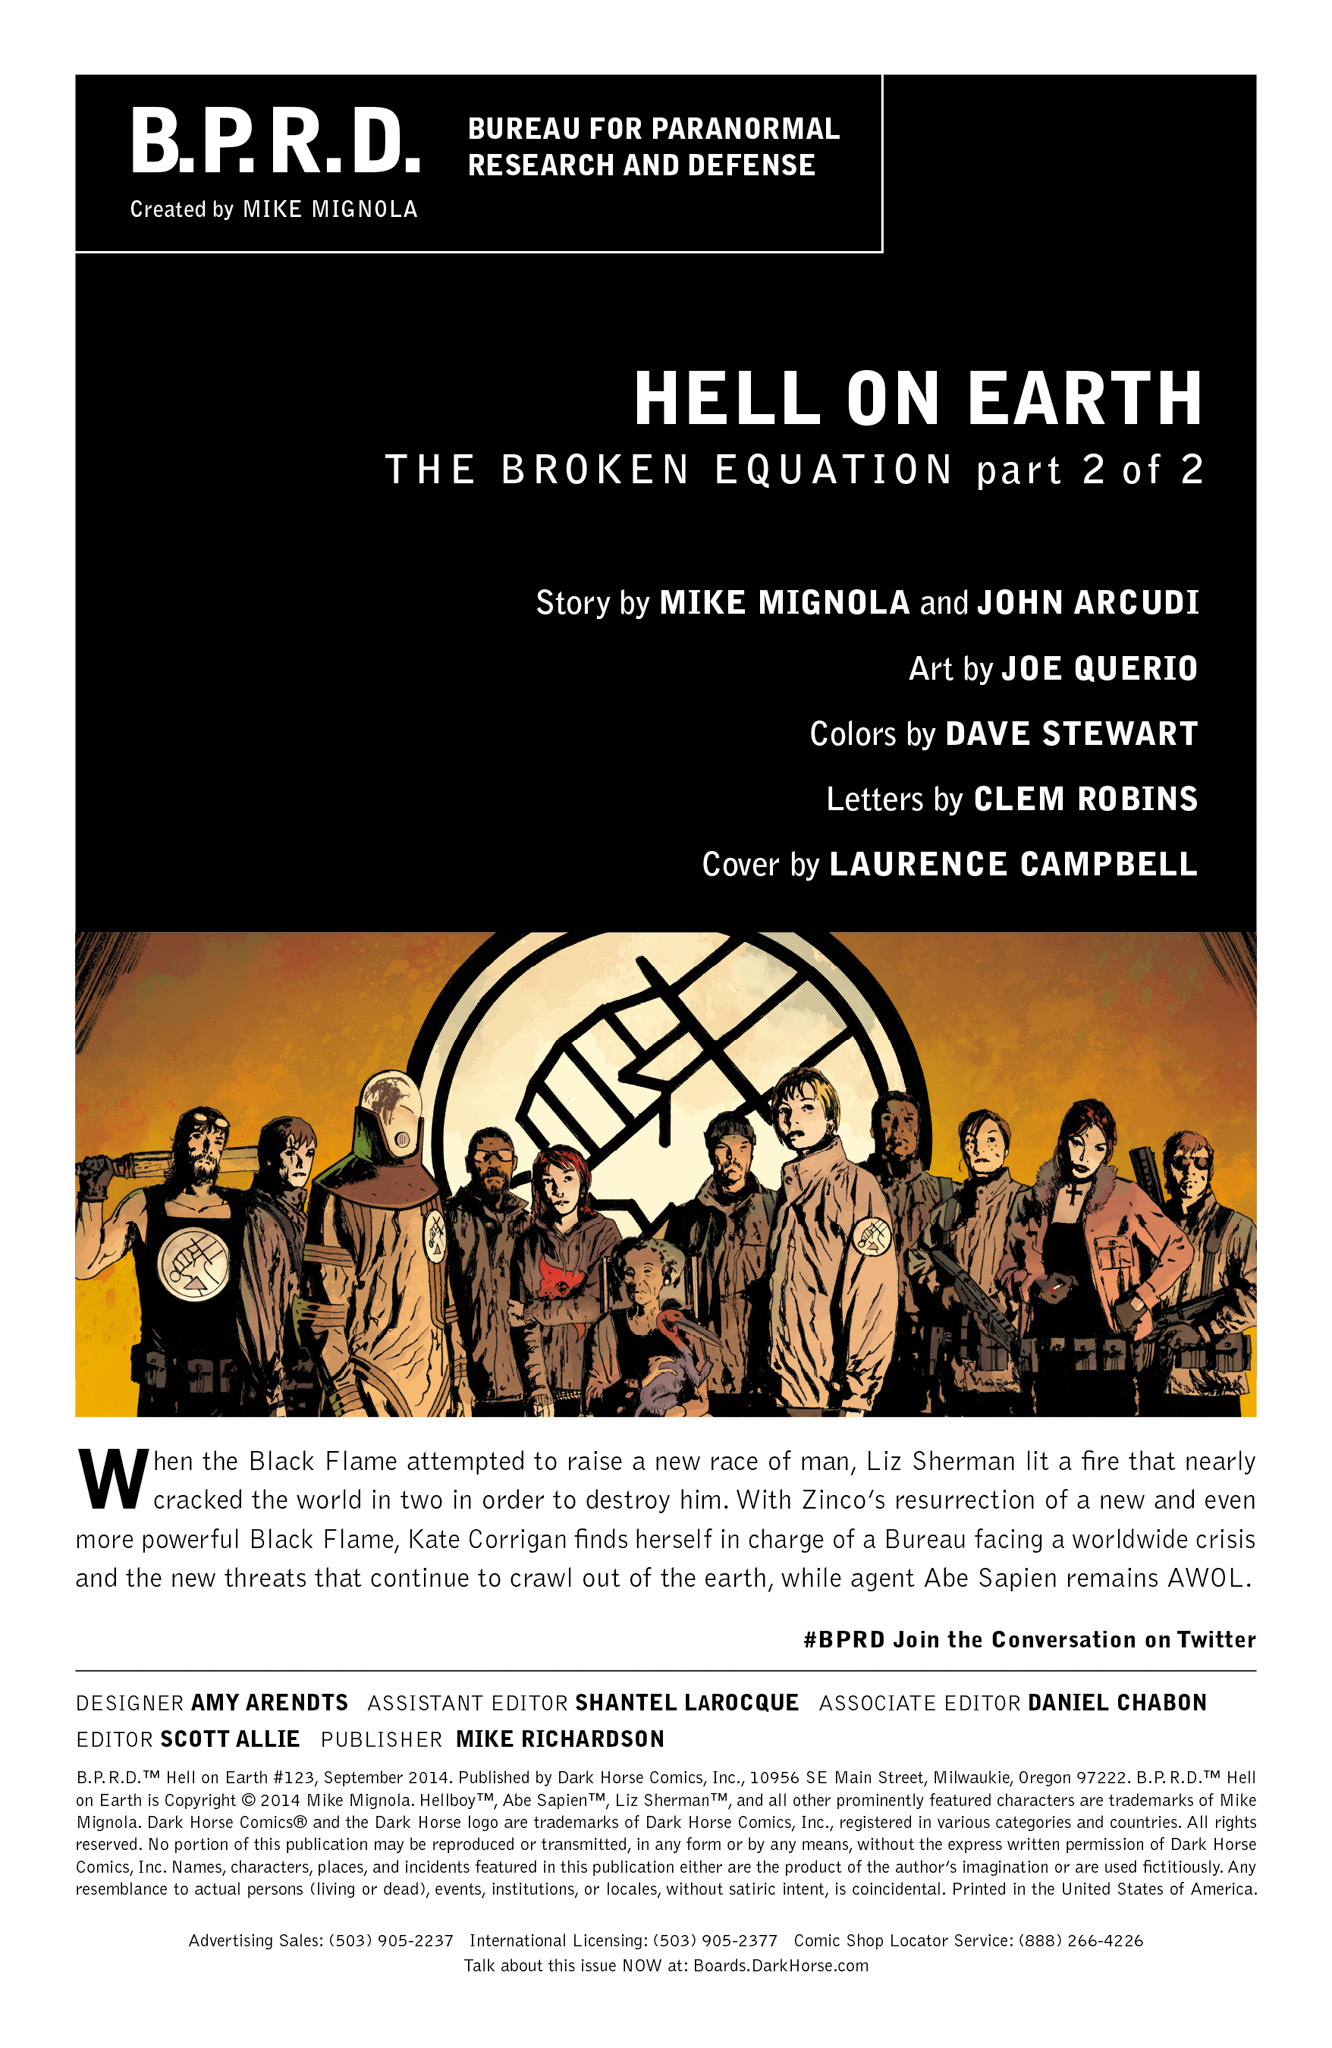 Read online B.P.R.D. Hell on Earth comic -  Issue #123 - 2